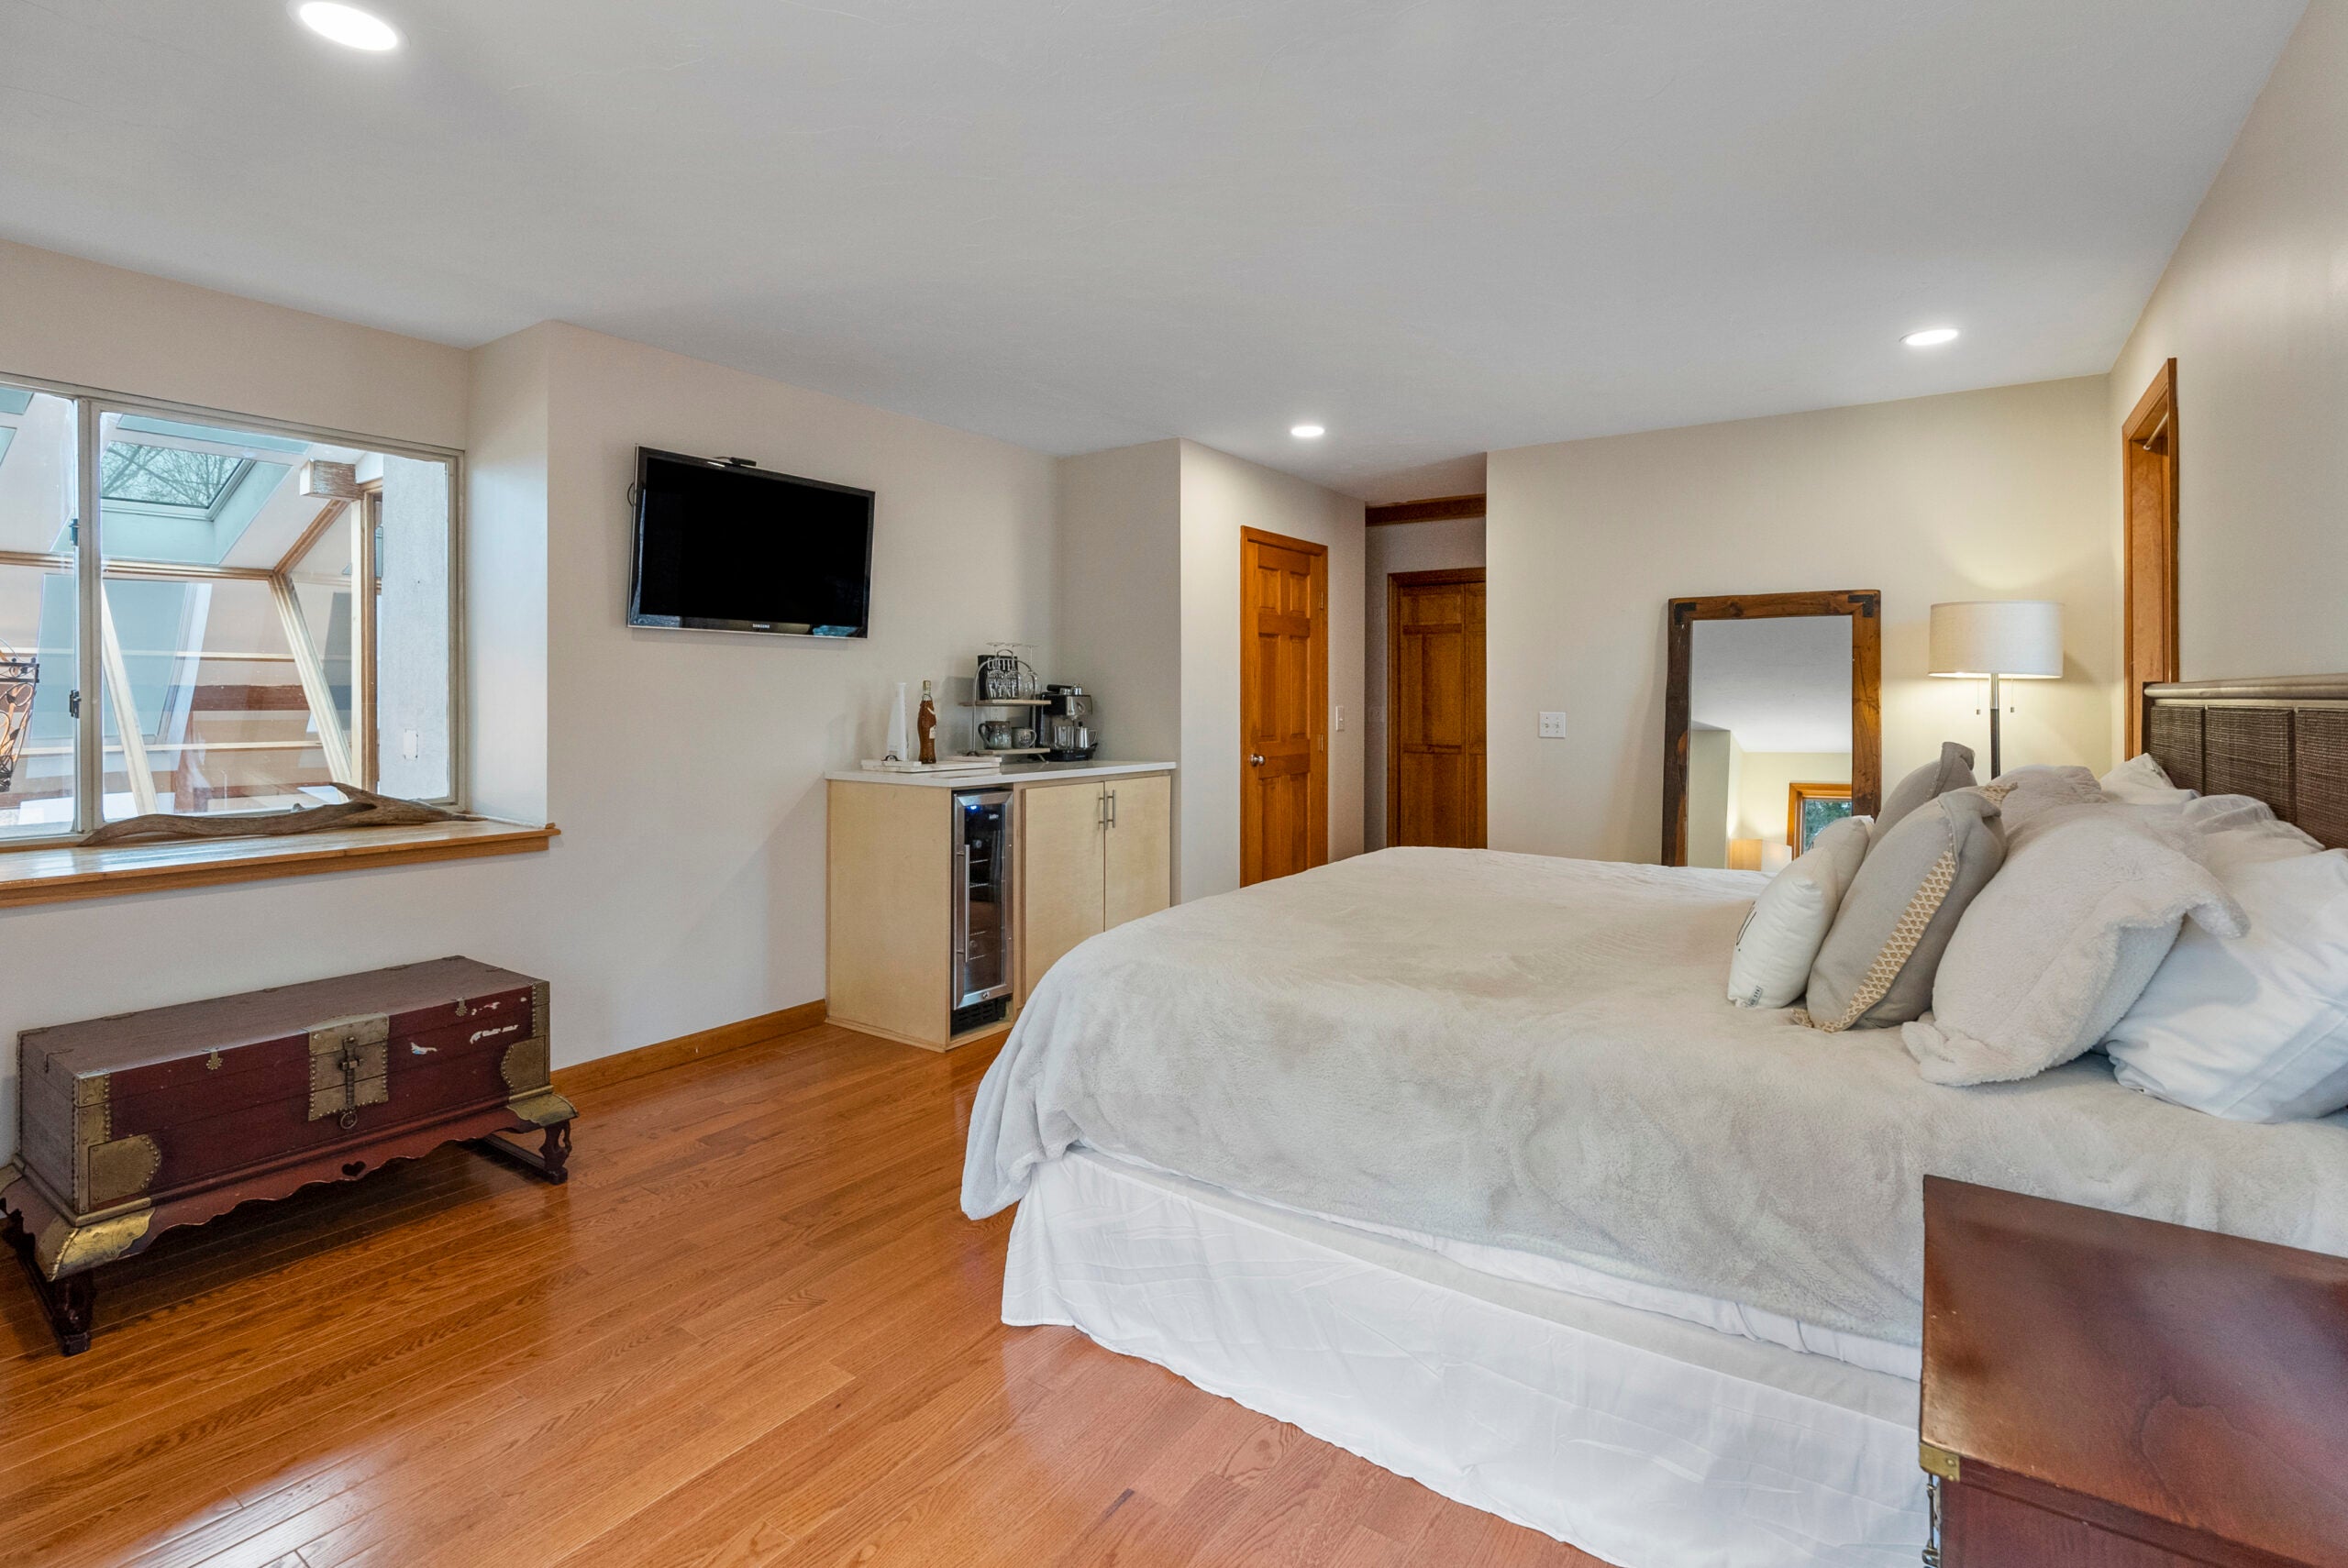 The primary suite bedroom in our home of the week.